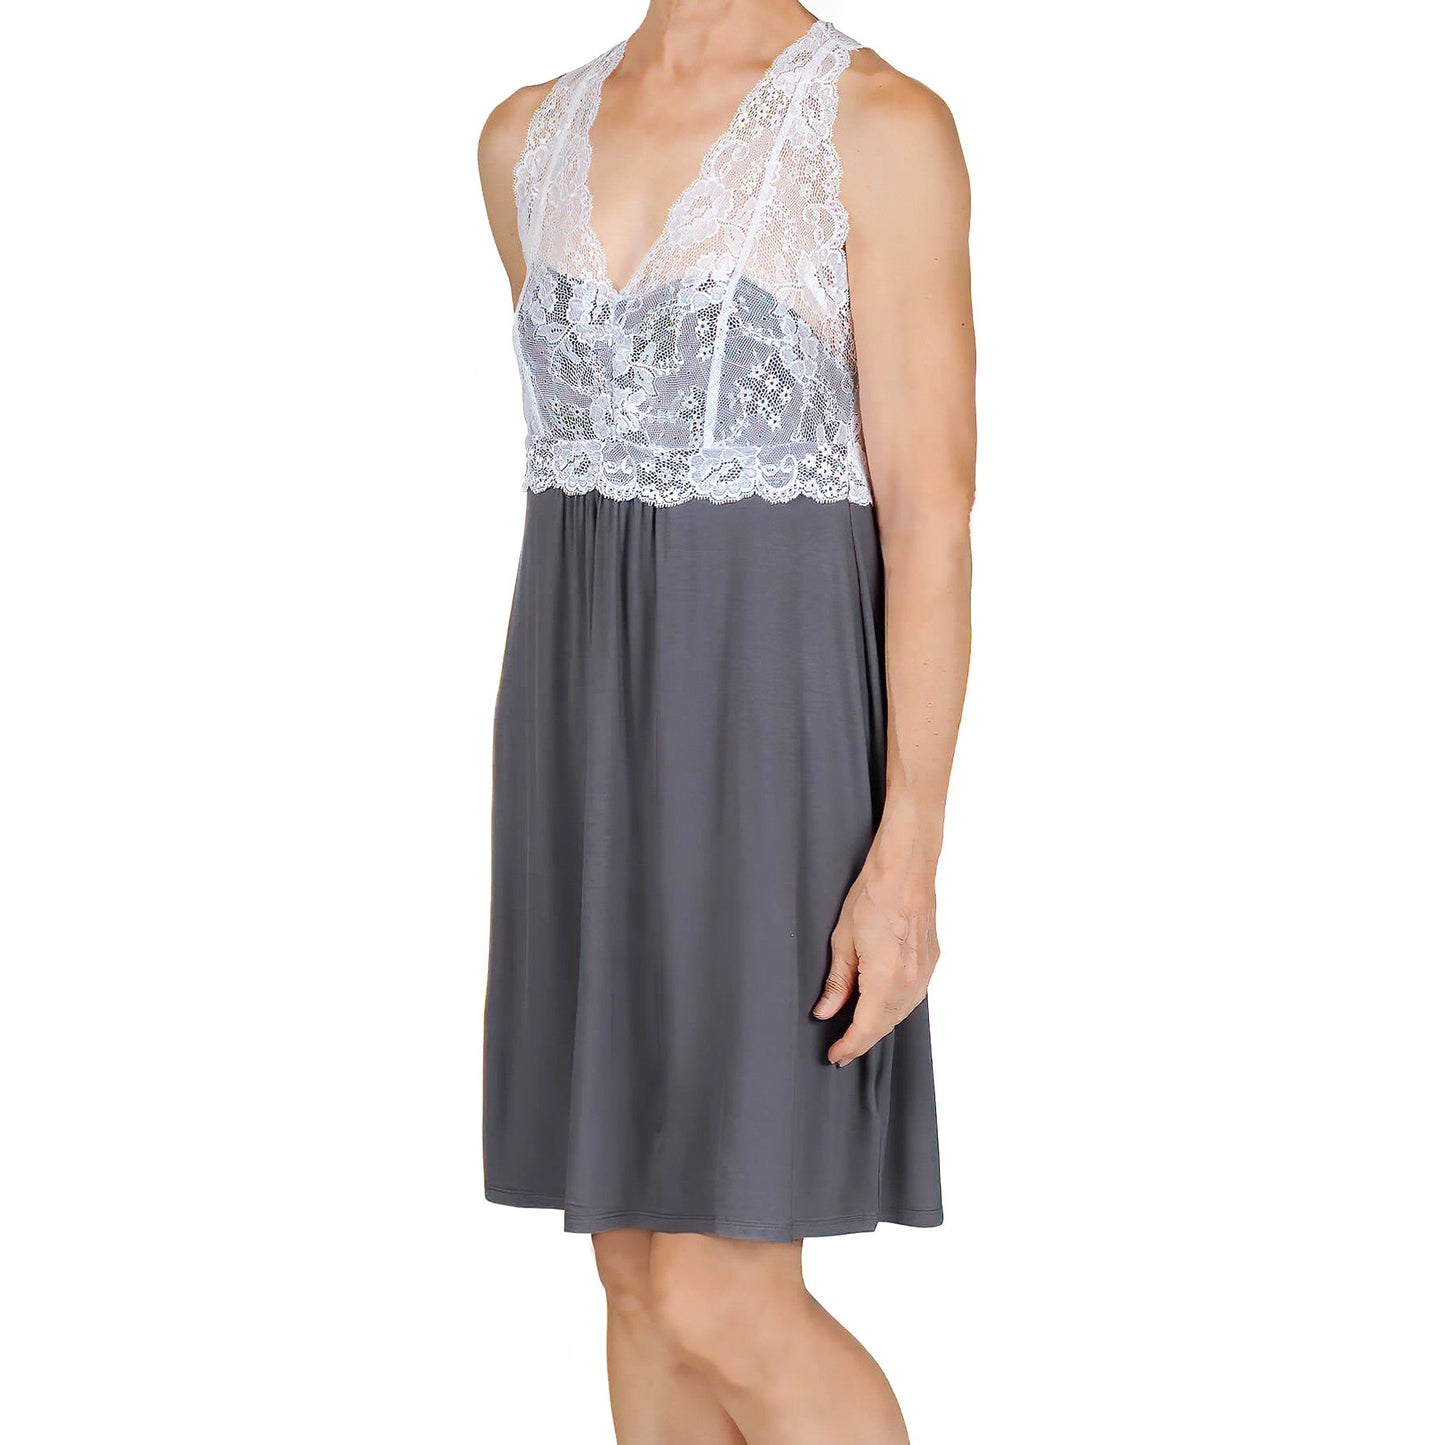 Catarina Knit Chemise Nightgown - Charcoal with White Lace Mystique Intimates